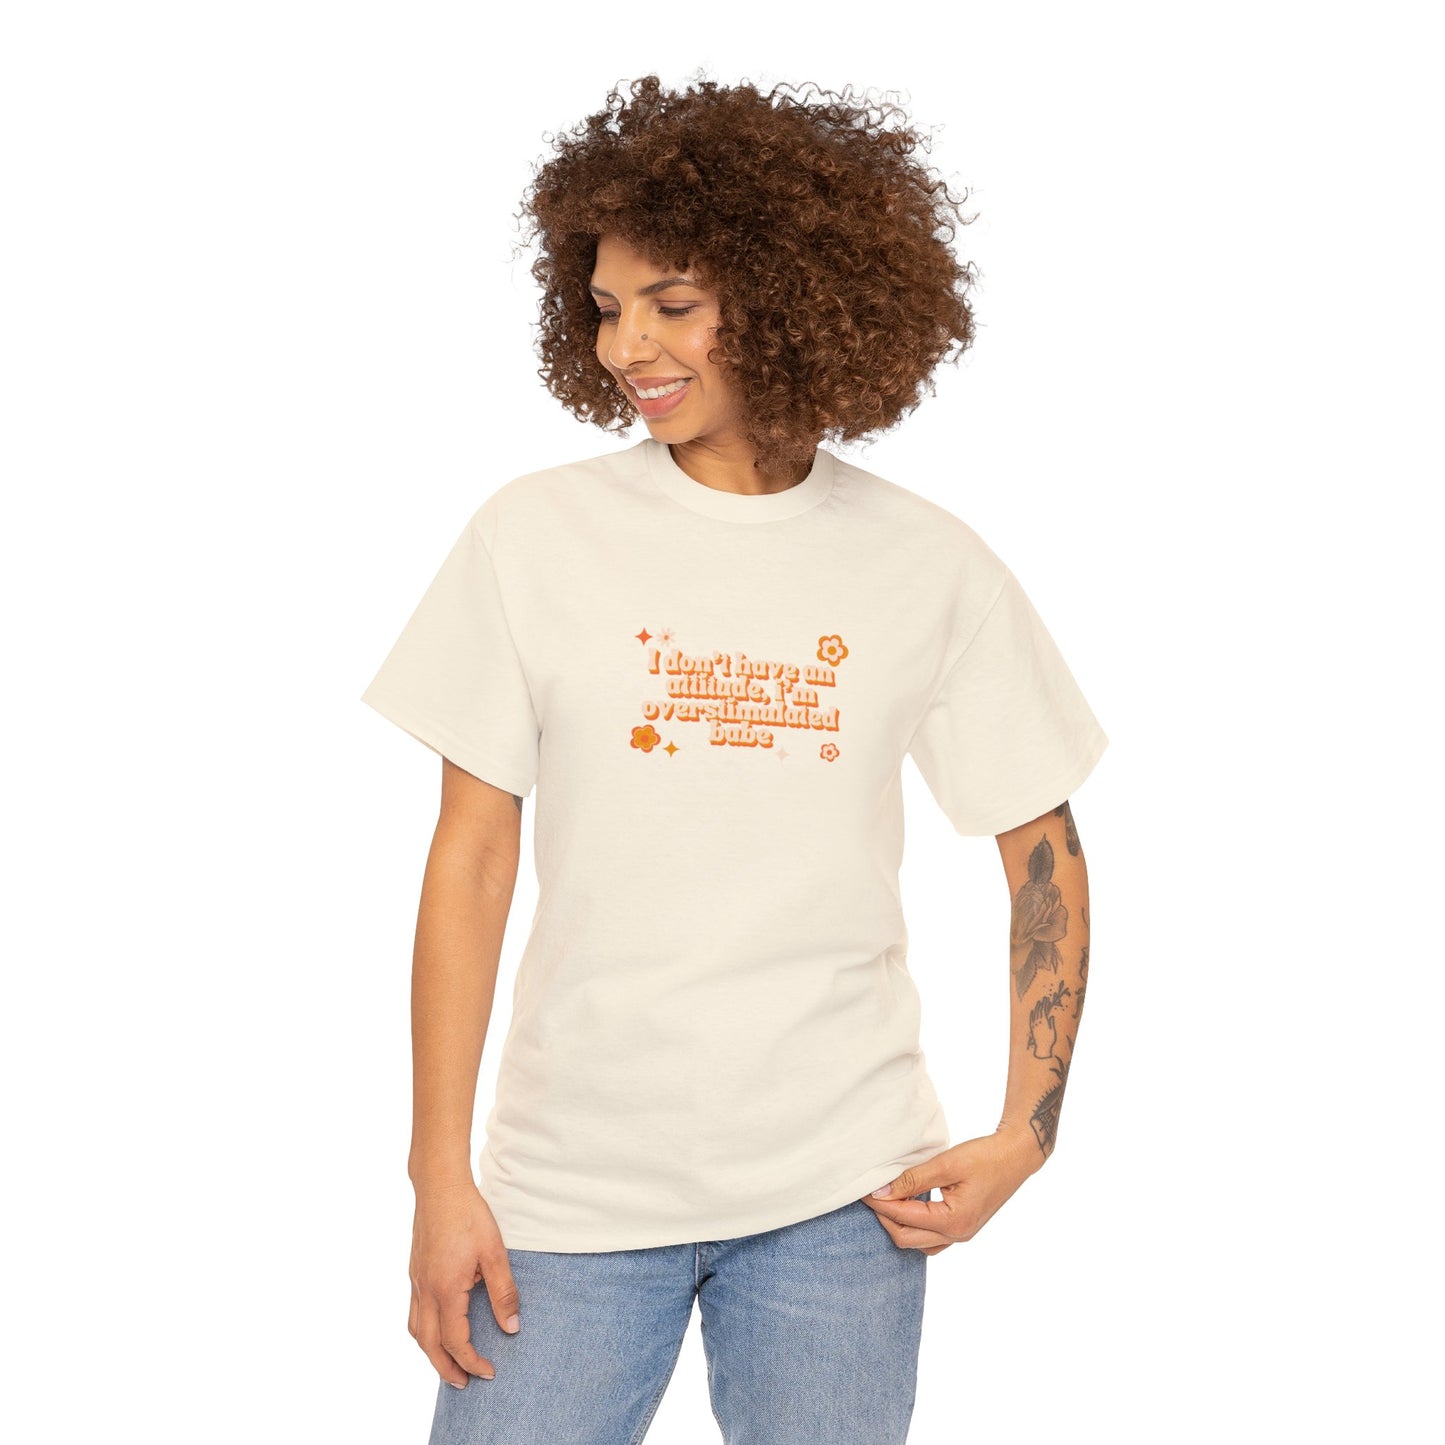 OVERSTIMULATED t-shirt - adult